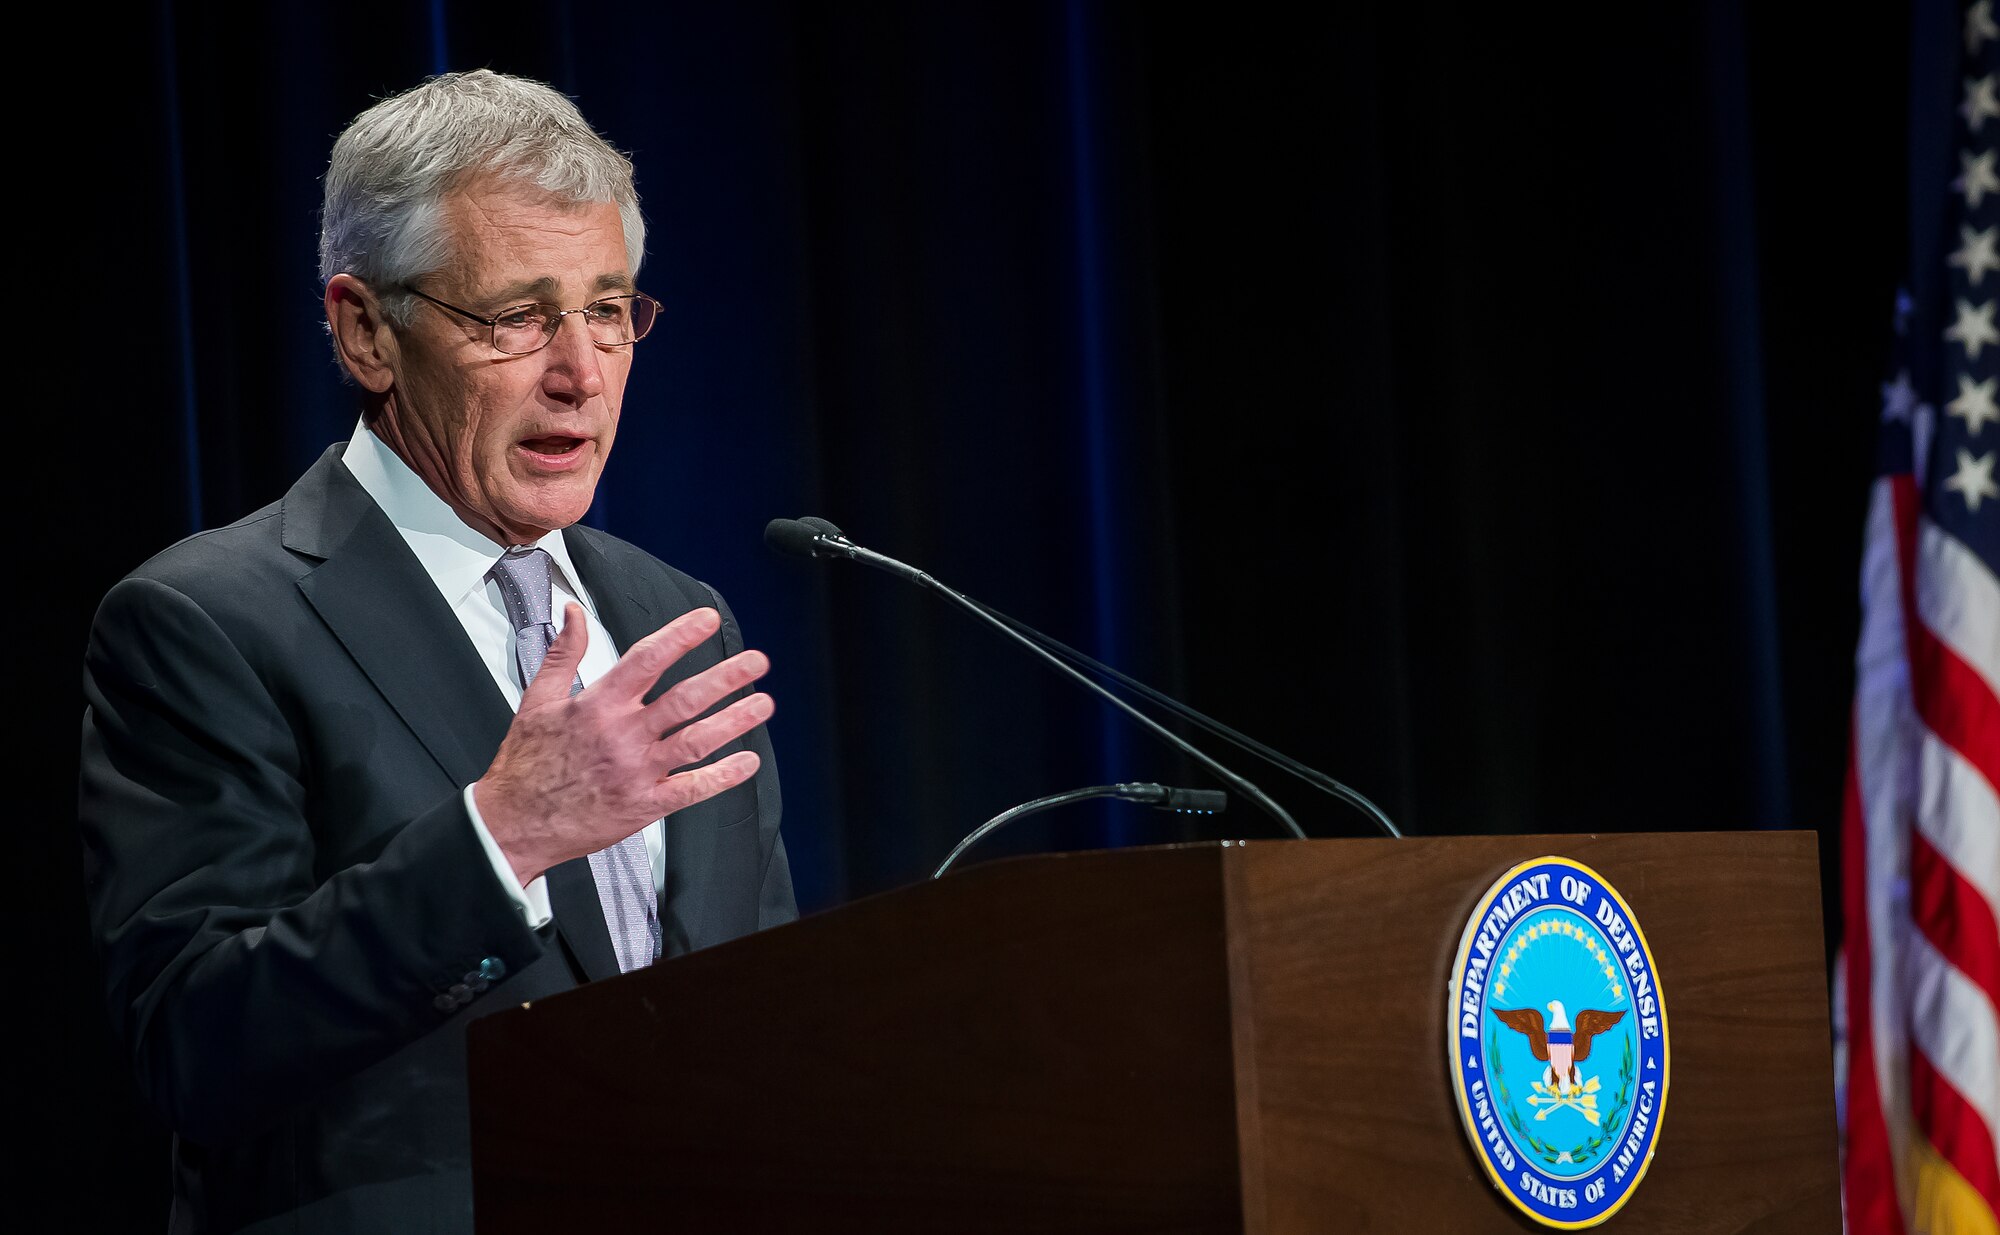 Defense Secretary Chuck Hagel gives his remarks prior to ceremoniously swearing in Deborah Lee James as the 23rd secretary of the Air Force,during a ceremony in the Pentagon, Washington, D.C., Jan. 24, 2014. Hagel called James well suited to lead the Air Force as the nation faces an increasingly uncertain security environment. (U.S. Air Force photo/Jim Varhegyi)